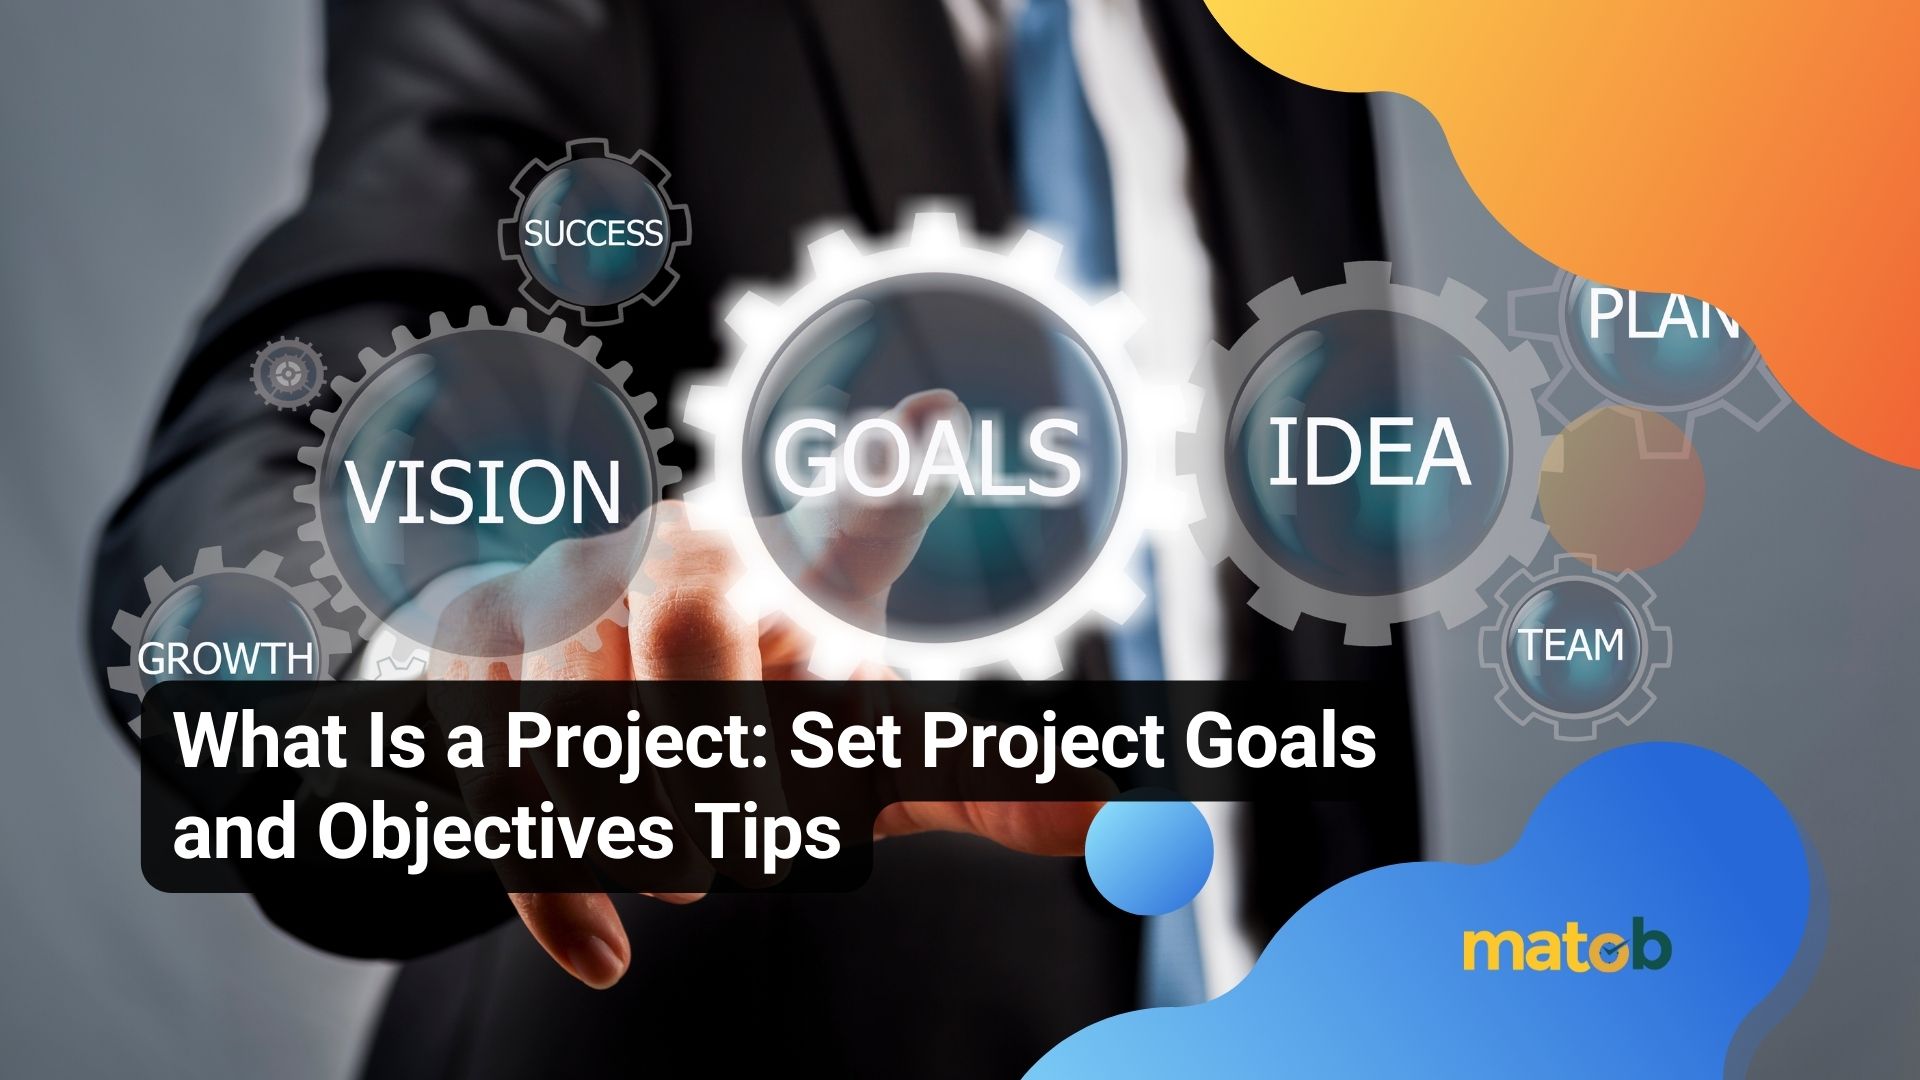 What Is a Project: Set Project Goals and Objectives Tips